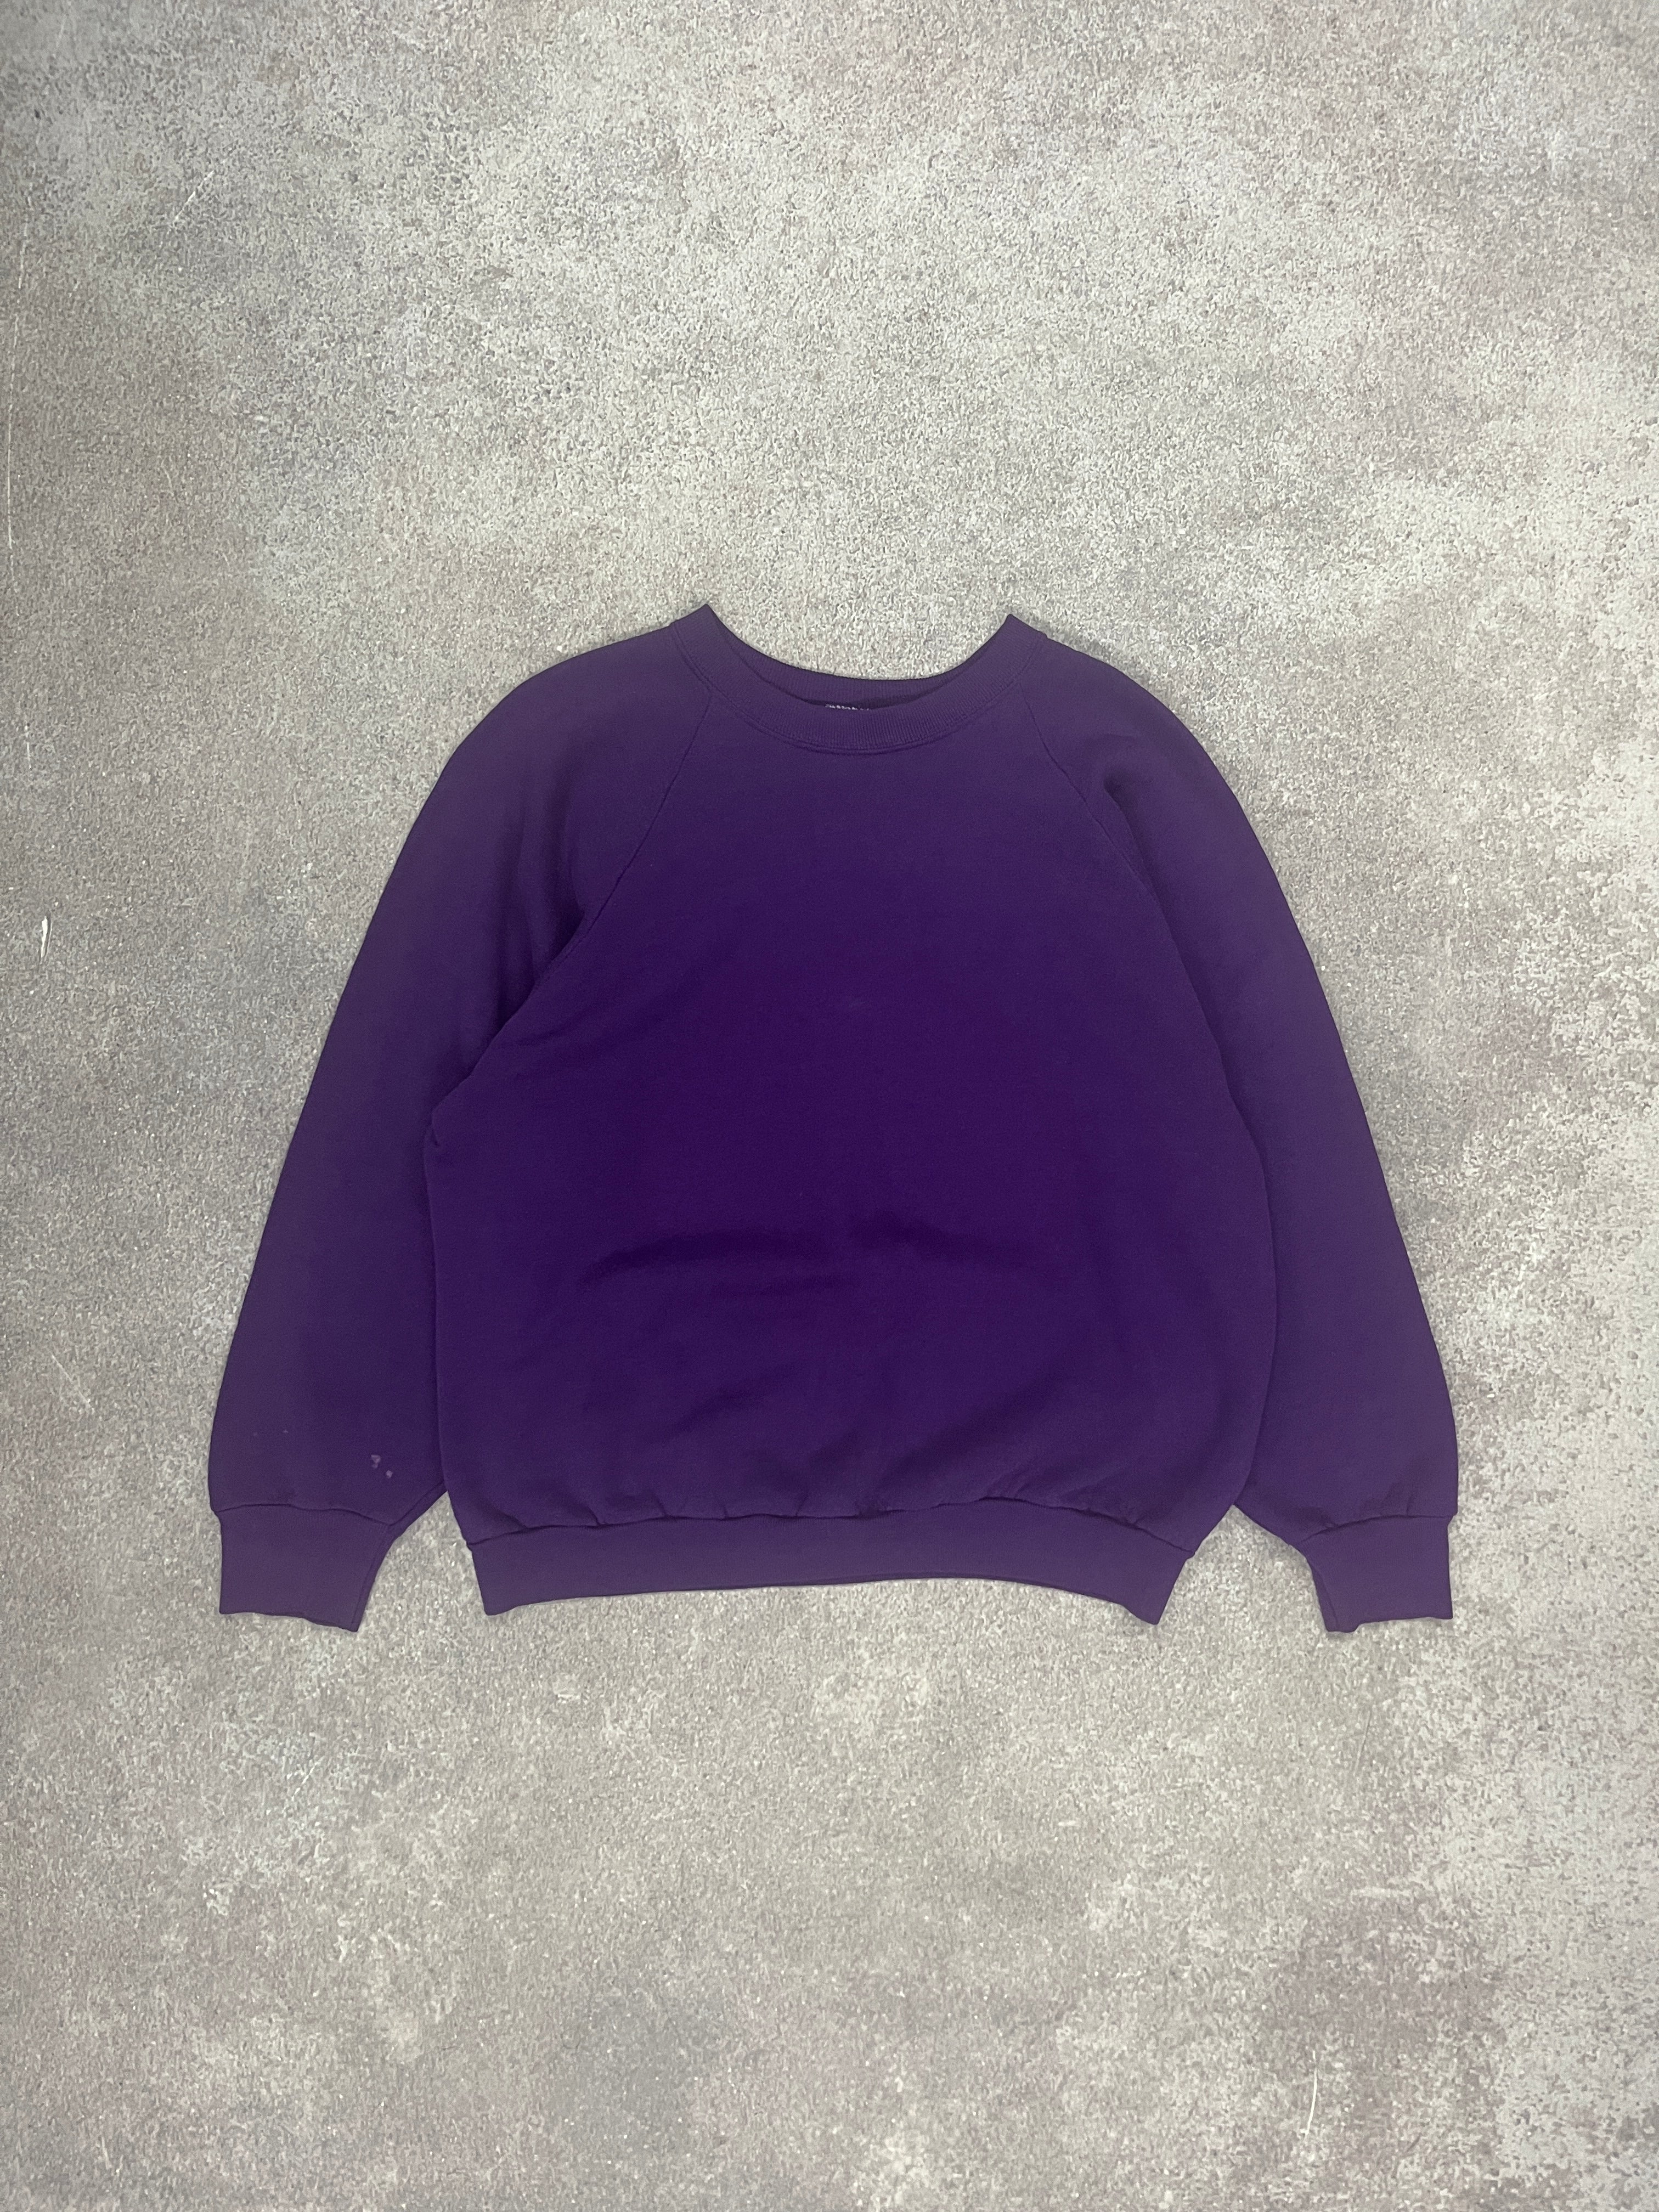 Vintage Blank Sweater Blue // X-Small - RHAGHOUSE VINTAGE